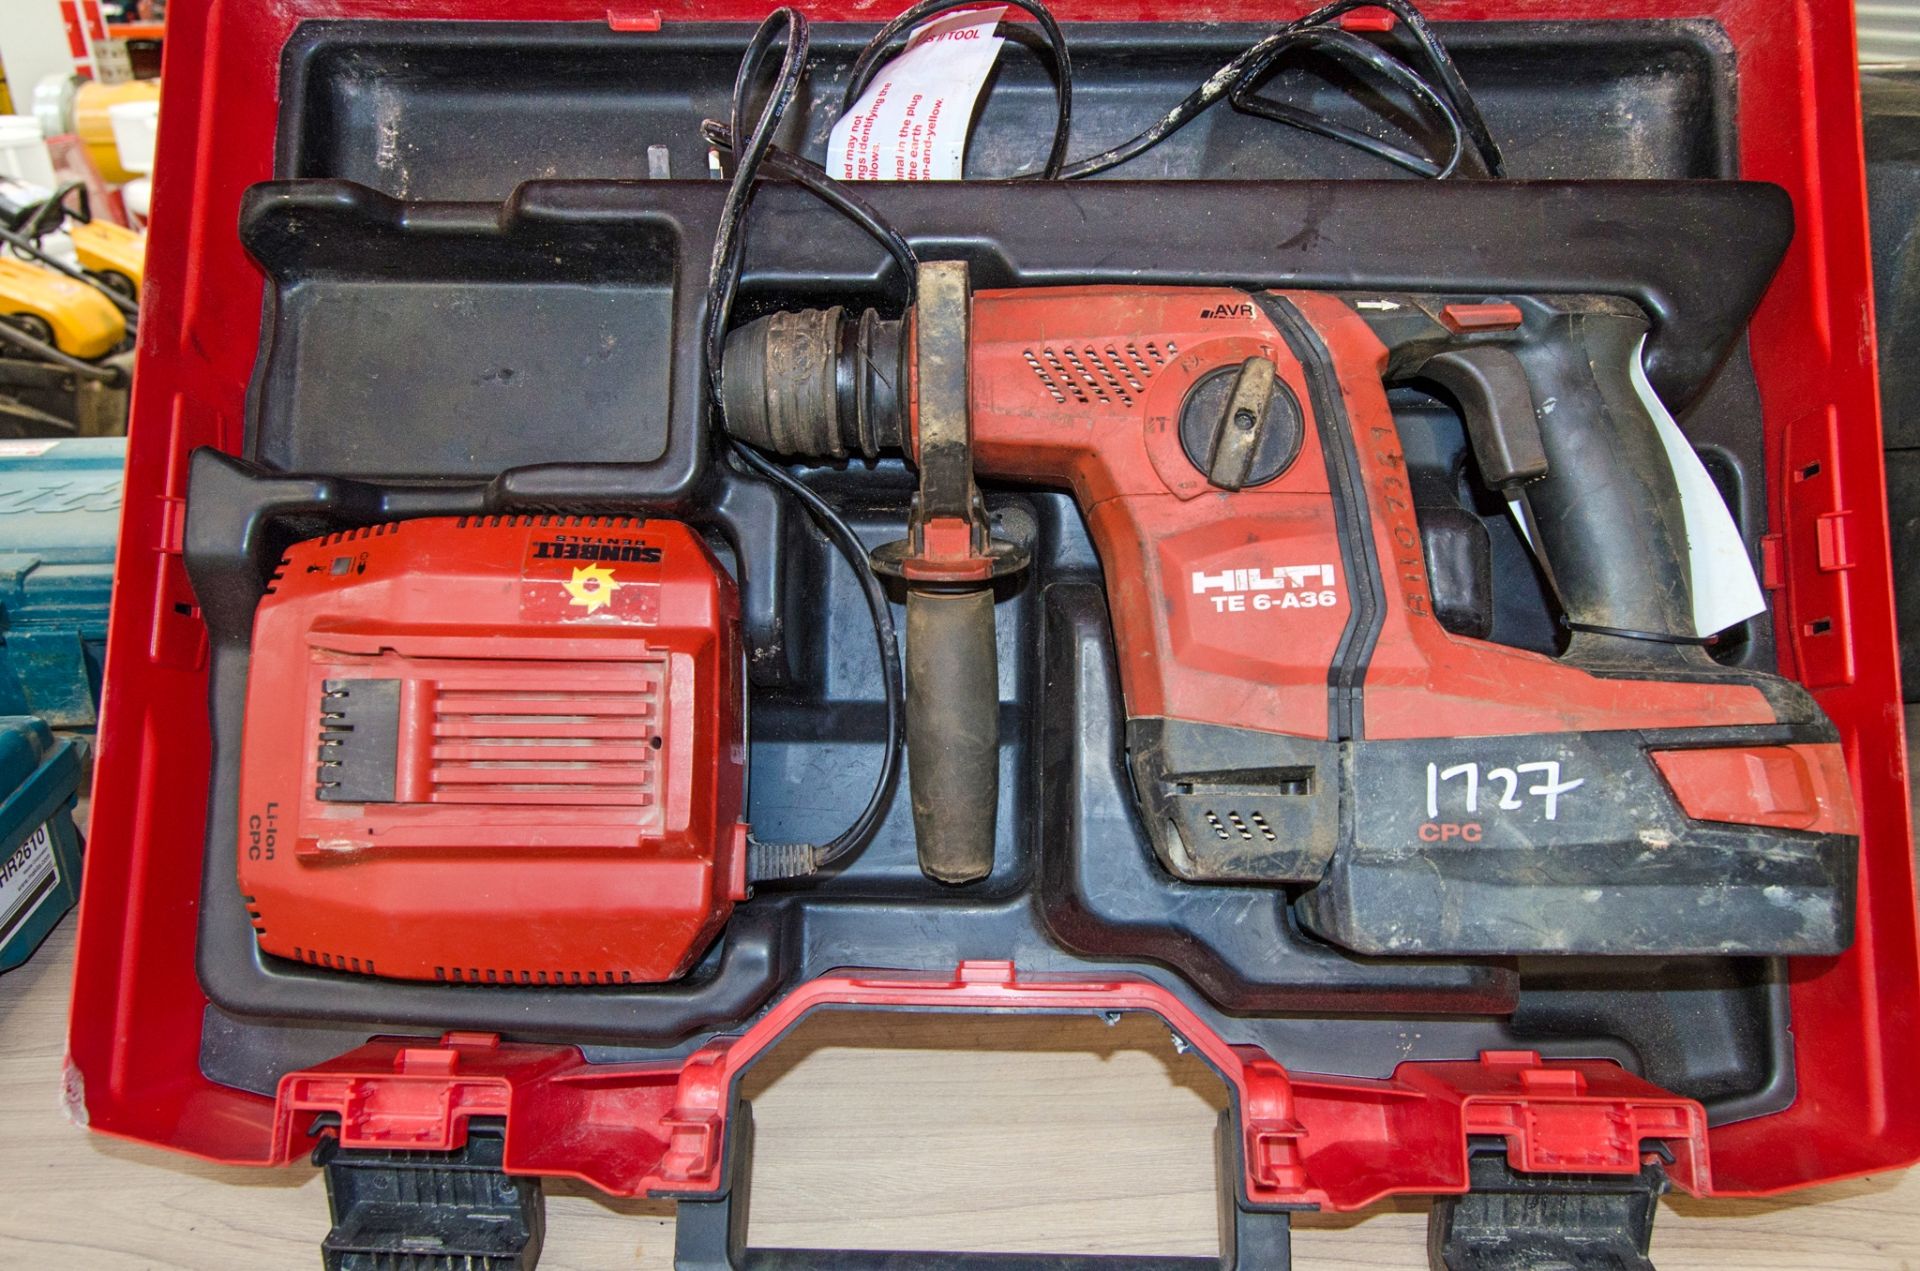 Hilti TE6-A36 cordless 36v SDS rotary hammer drill c/w charger, battery and carry case A1107329